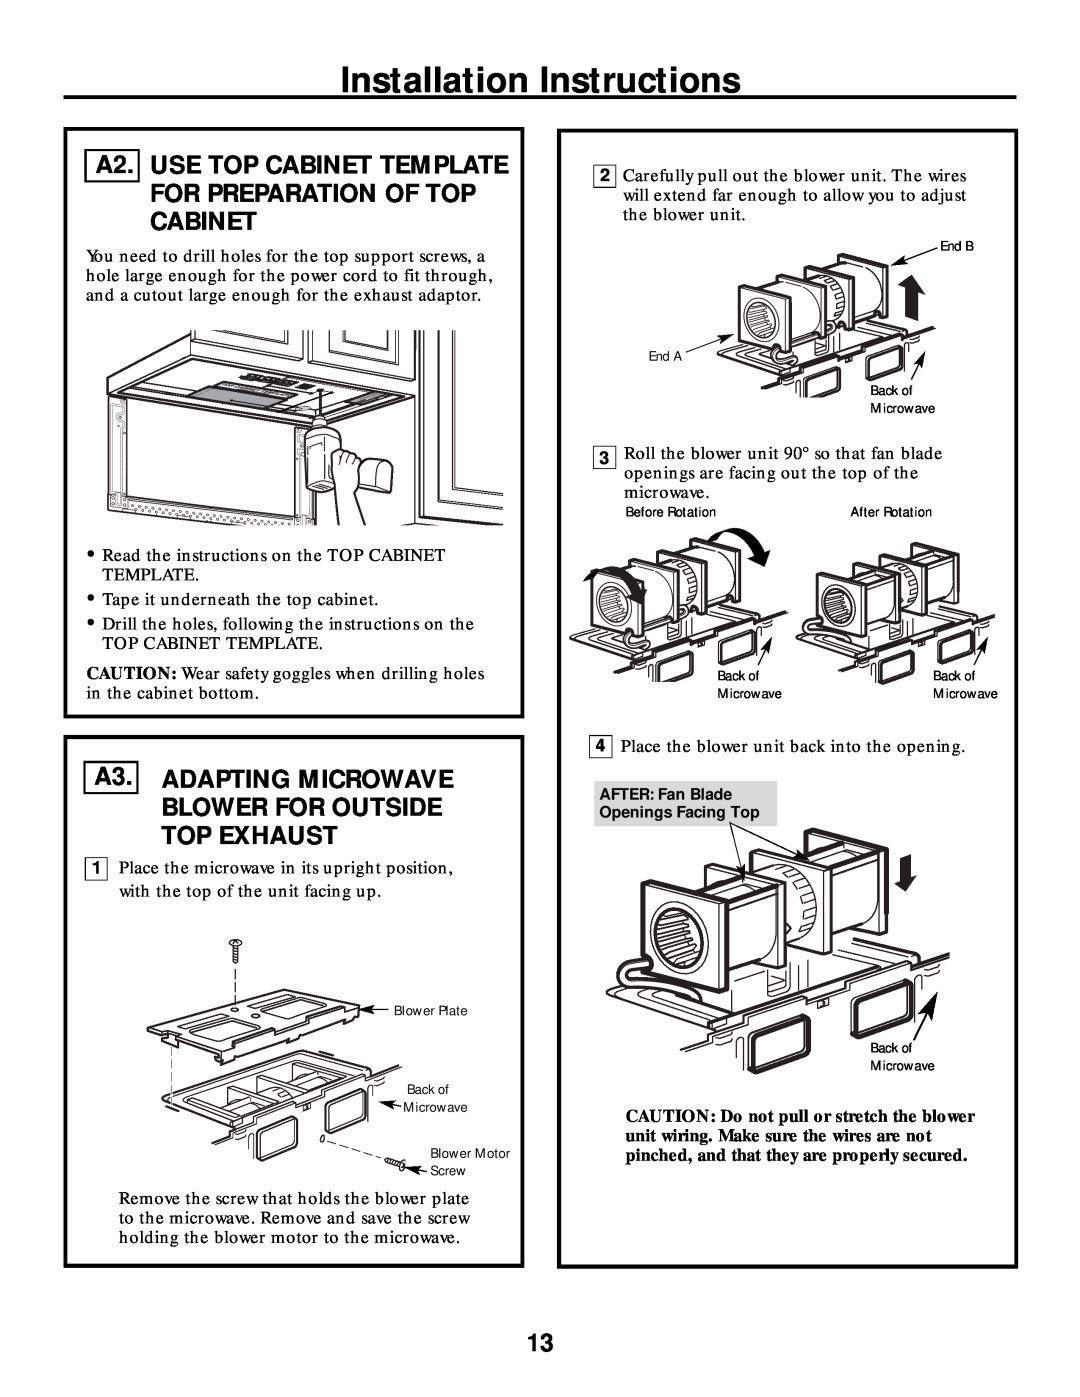 Frigidaire 316495063 warranty A3. ADAPTING MICROWAVE BLOWER FOR OUTSIDE TOP EXHAUST, Installation Instructions 